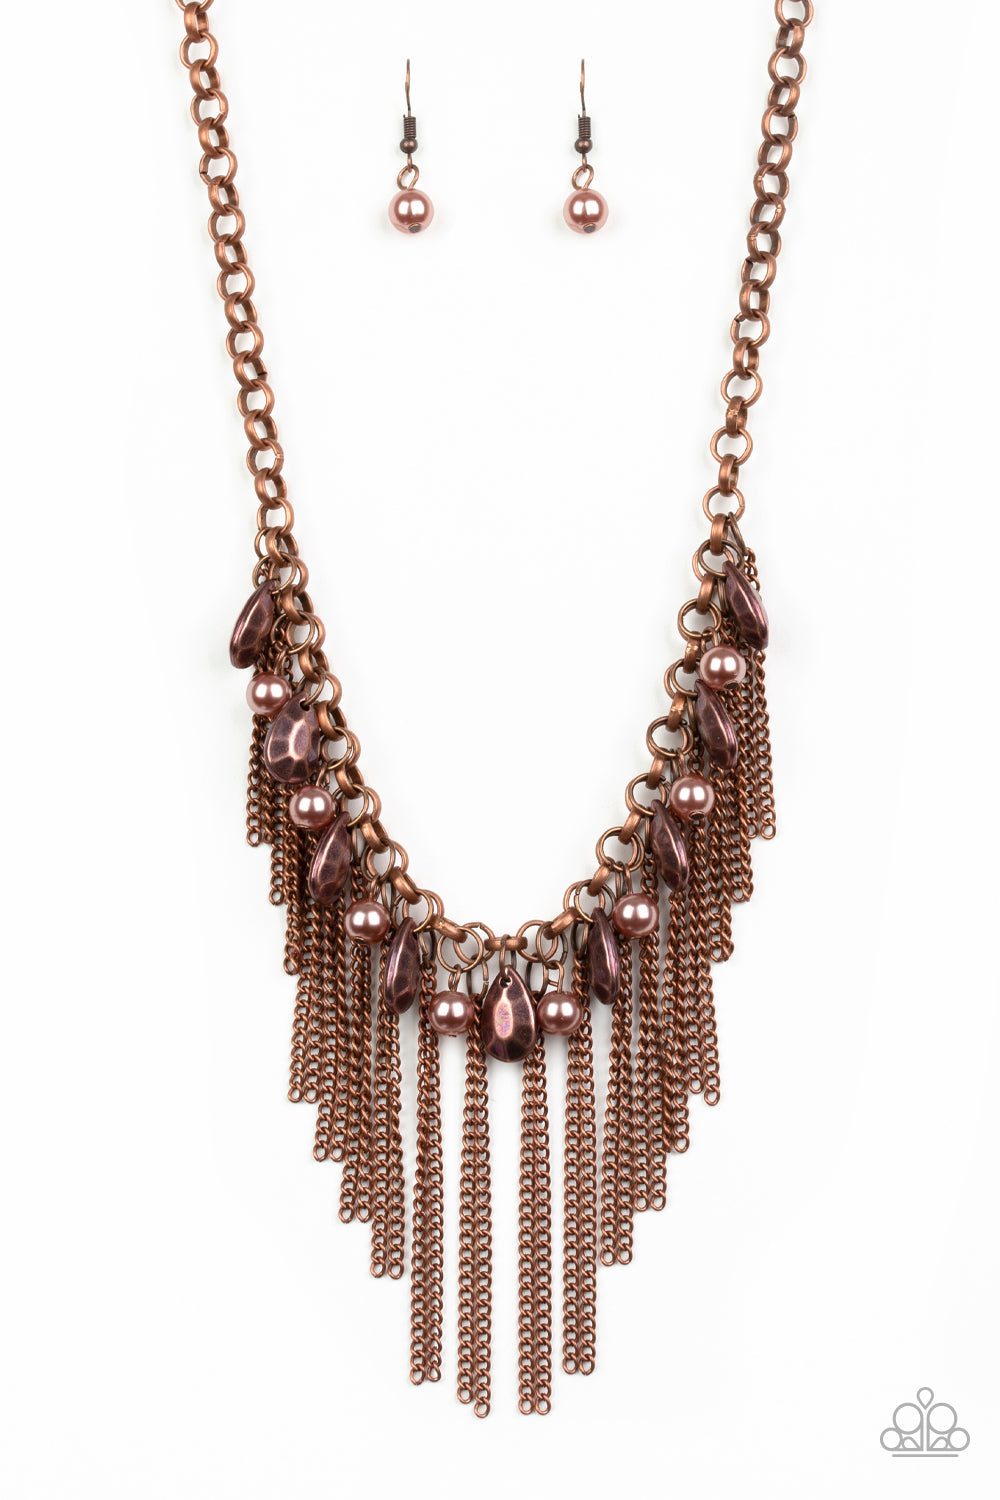 Industrial Intensity Copper Necklace - Paparazzi Accessories - Bejeweled Accessories By  Kristie - A collection of faceted copper teardrops and pearly copper beads drip from the bottom of an antiqued copper chain. Pairs of copper chains stream from the of the chain, creating a intensely tapered fringe below the collar. Features an adjustable clasp closure. Sold as one individual necklace.